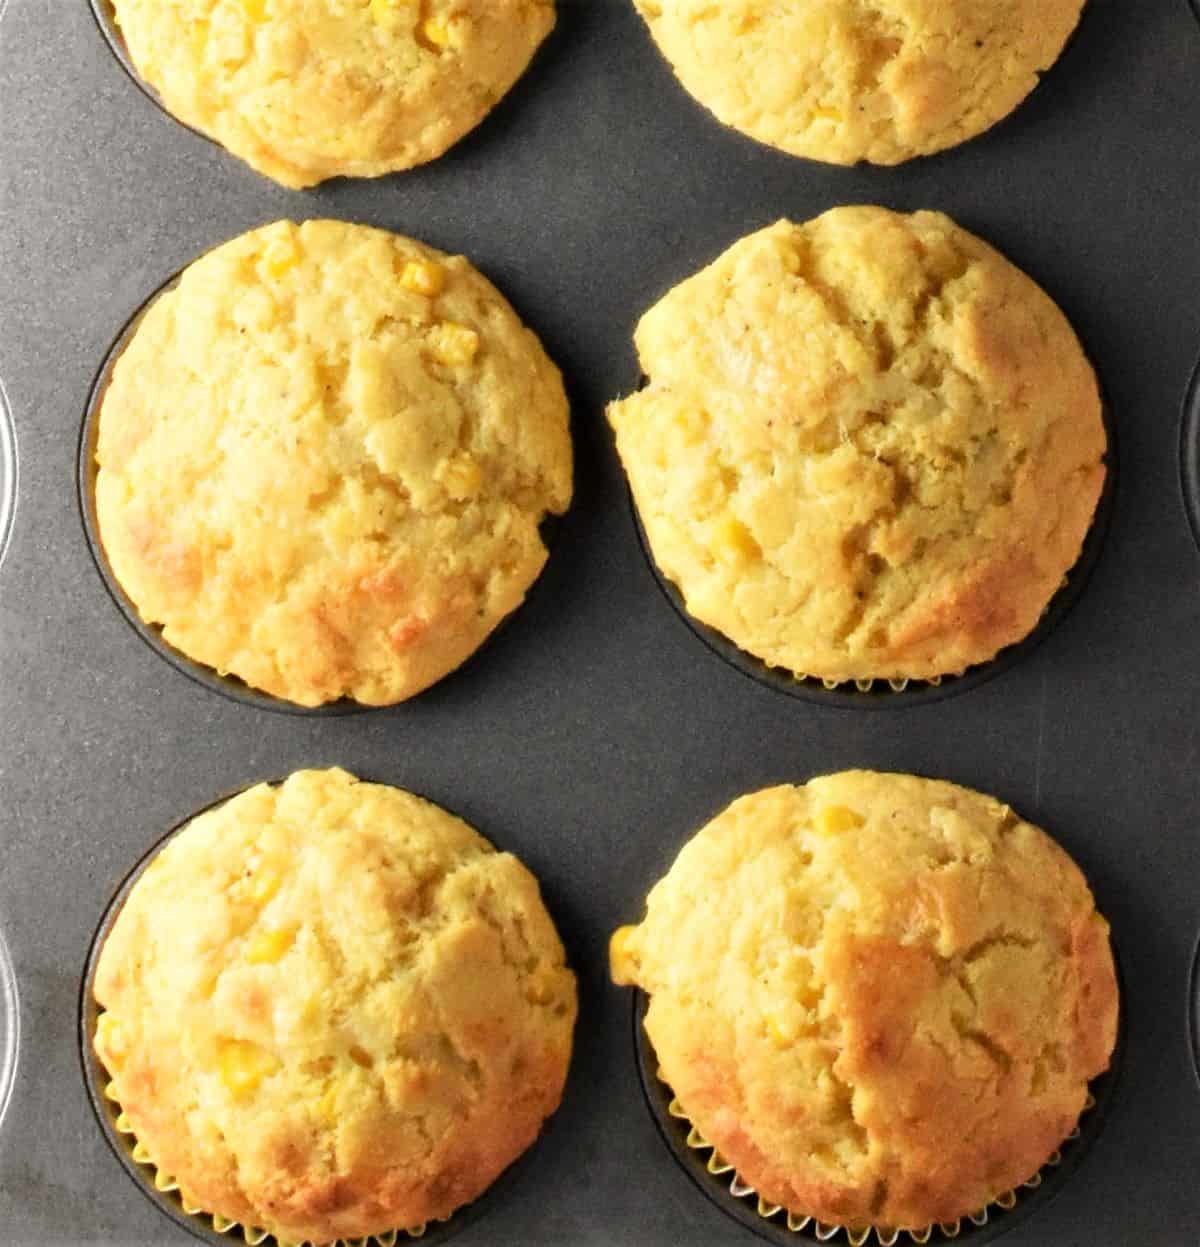 Top down view of 6 cornmeal muffins inside muffin pan.